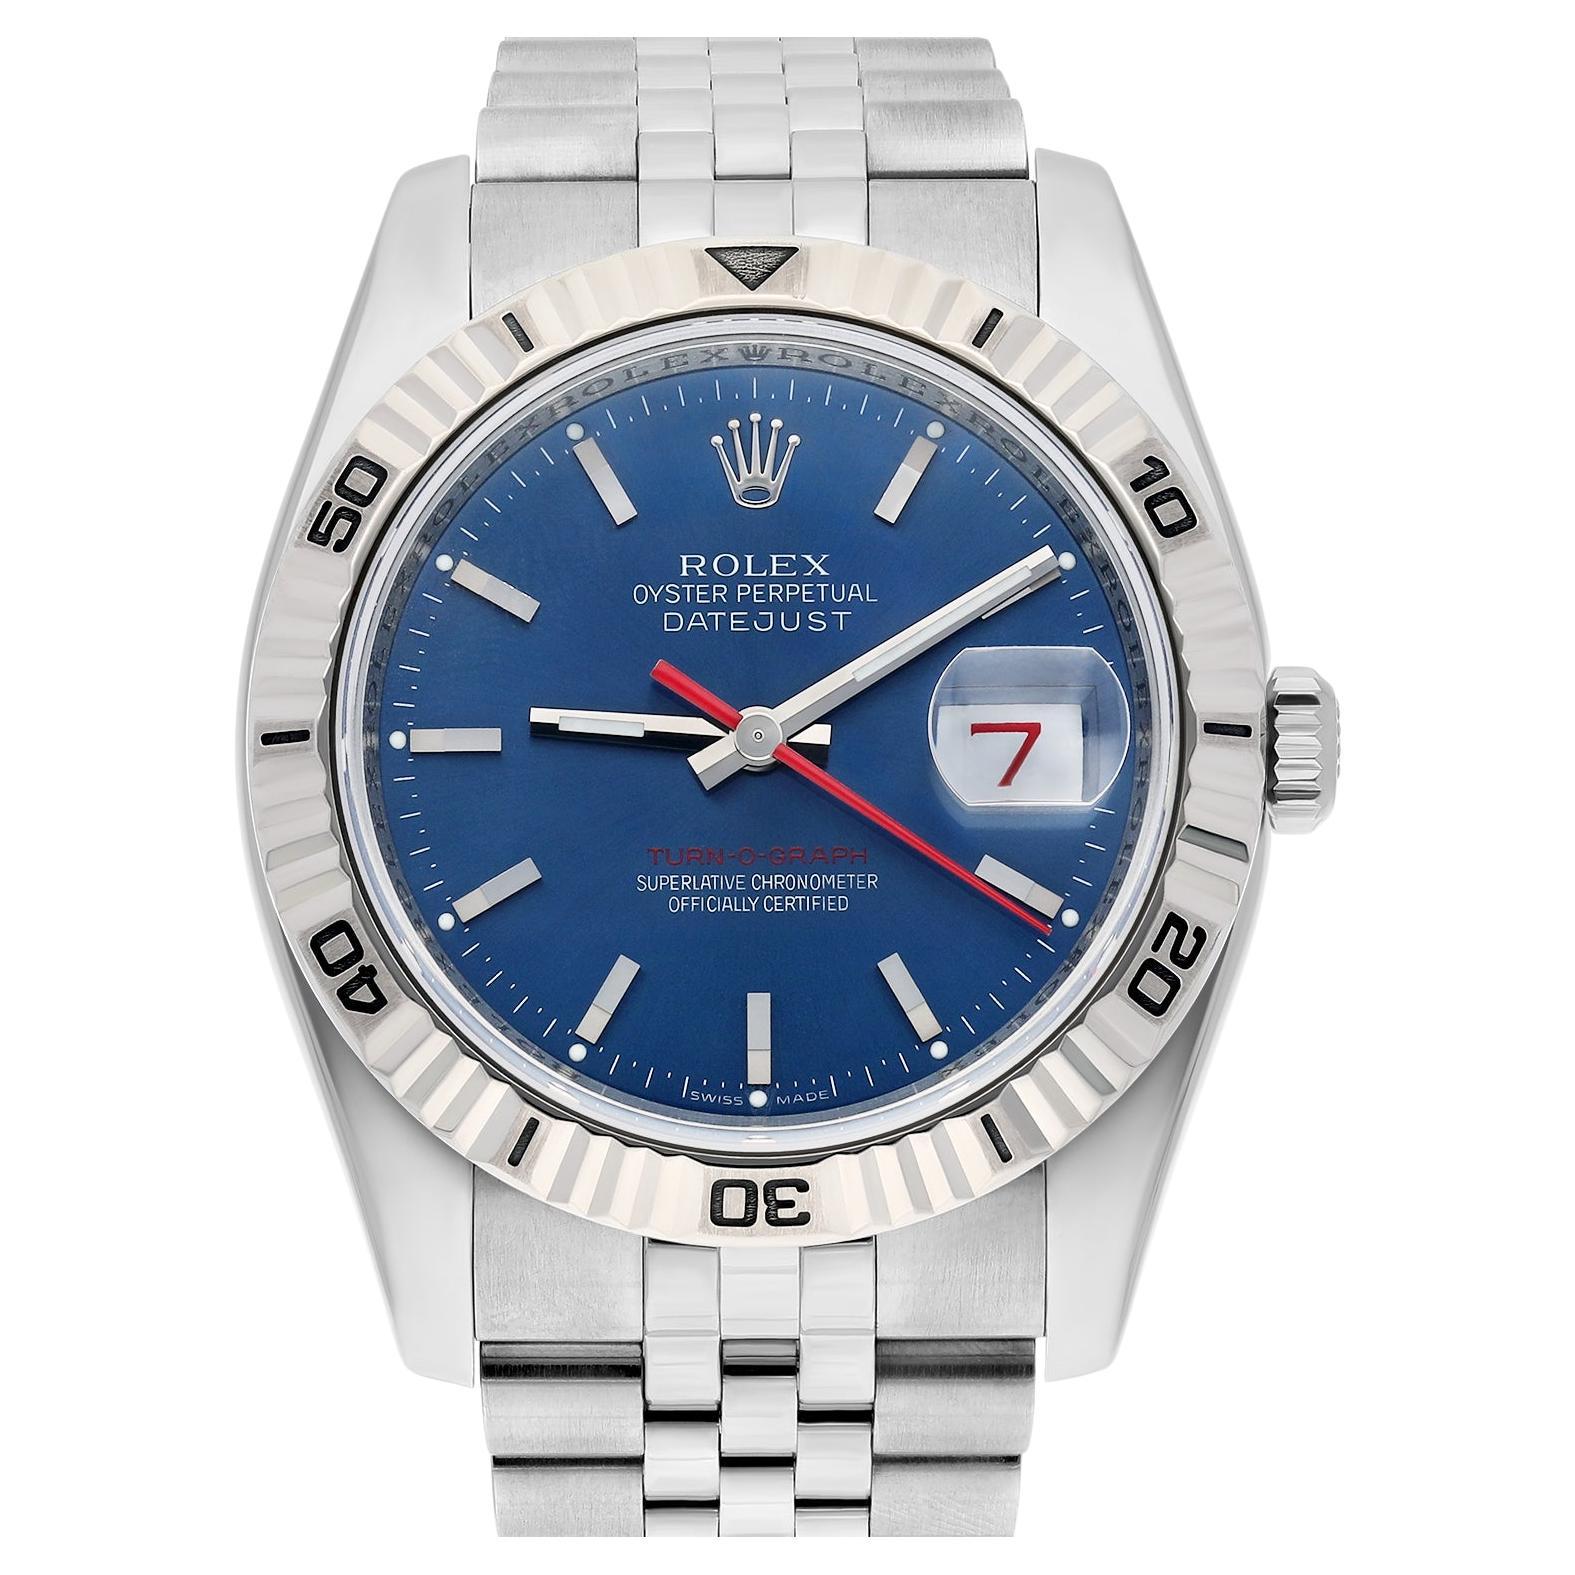 Rolex Datejust Turn-0-Graph 36mm Blue Dial Fluted Bezel Jubilee Watch 116264 For Sale